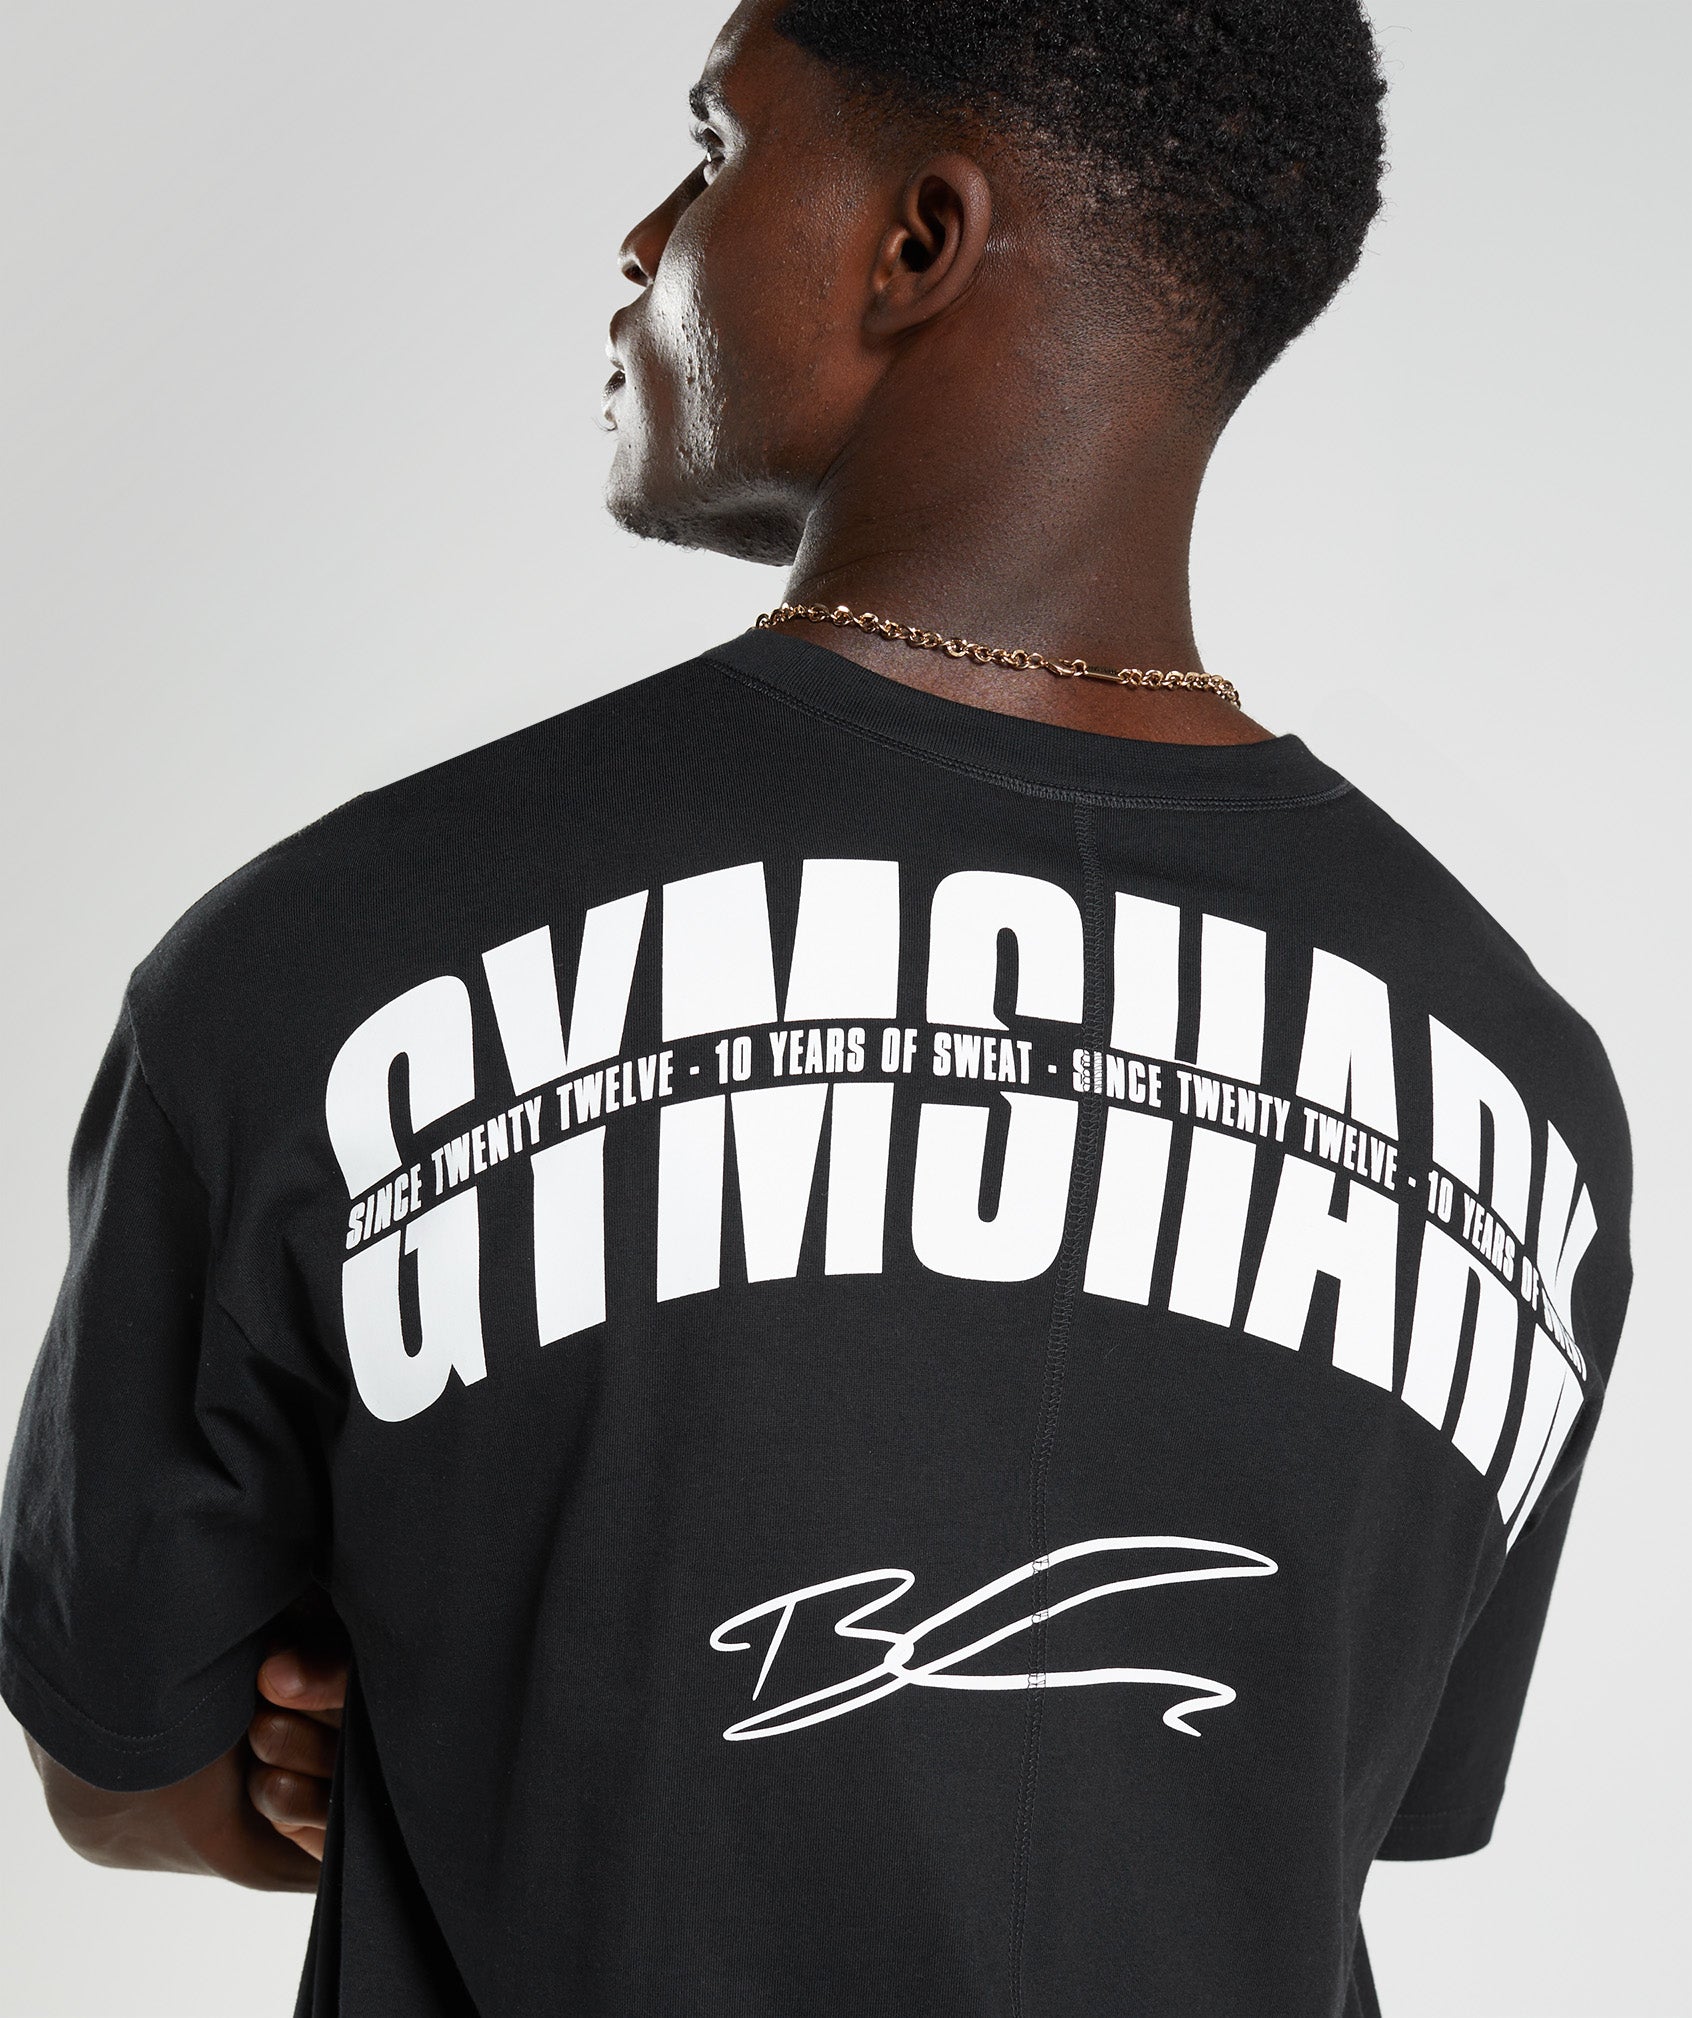 GS10 Year Oversized T-Shirt in Black - view 5